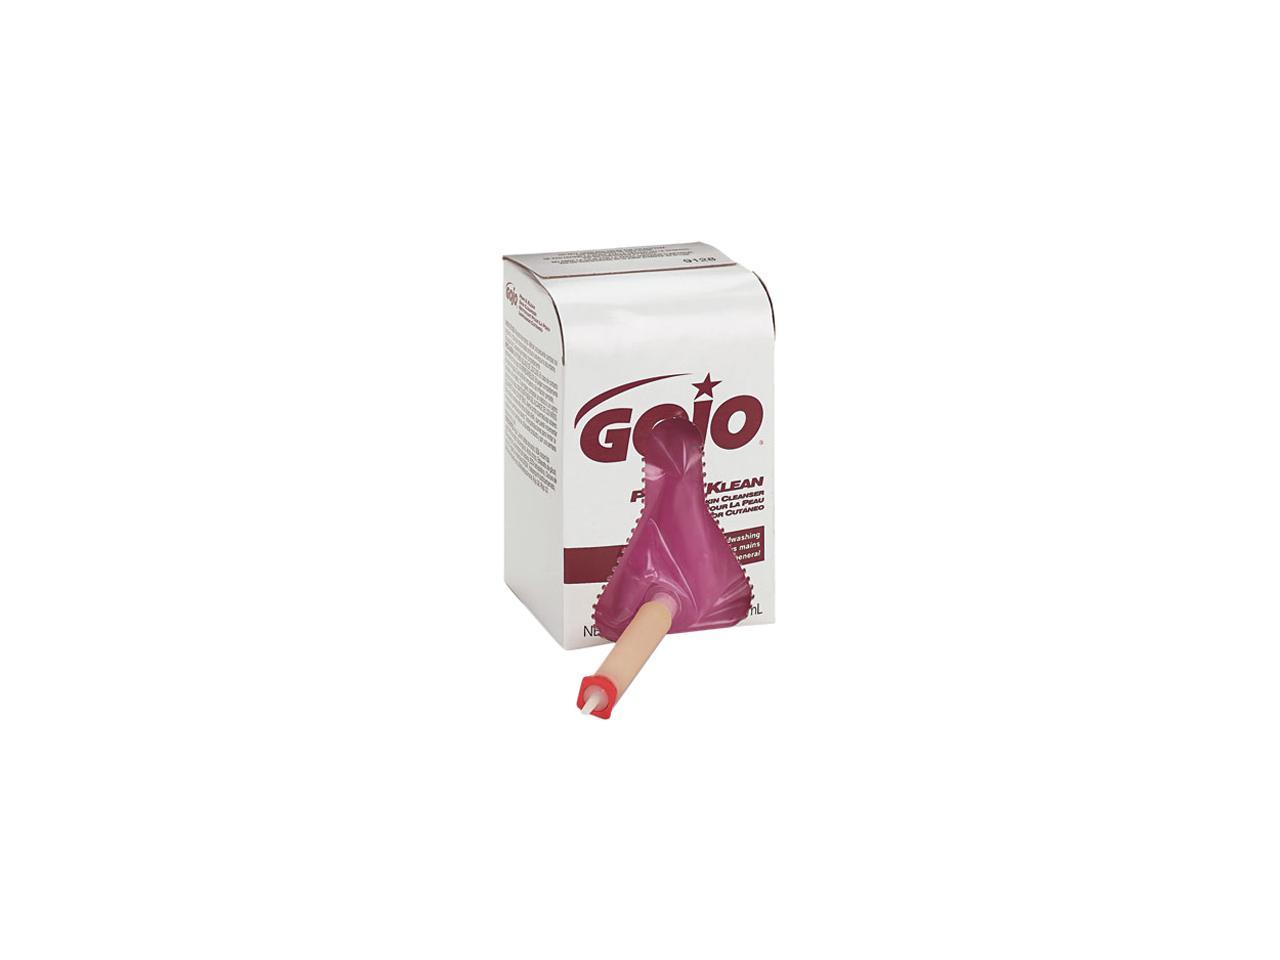 Gojo 9128 Pink and Klean Skin Cleanser 800 mL Refill Single 